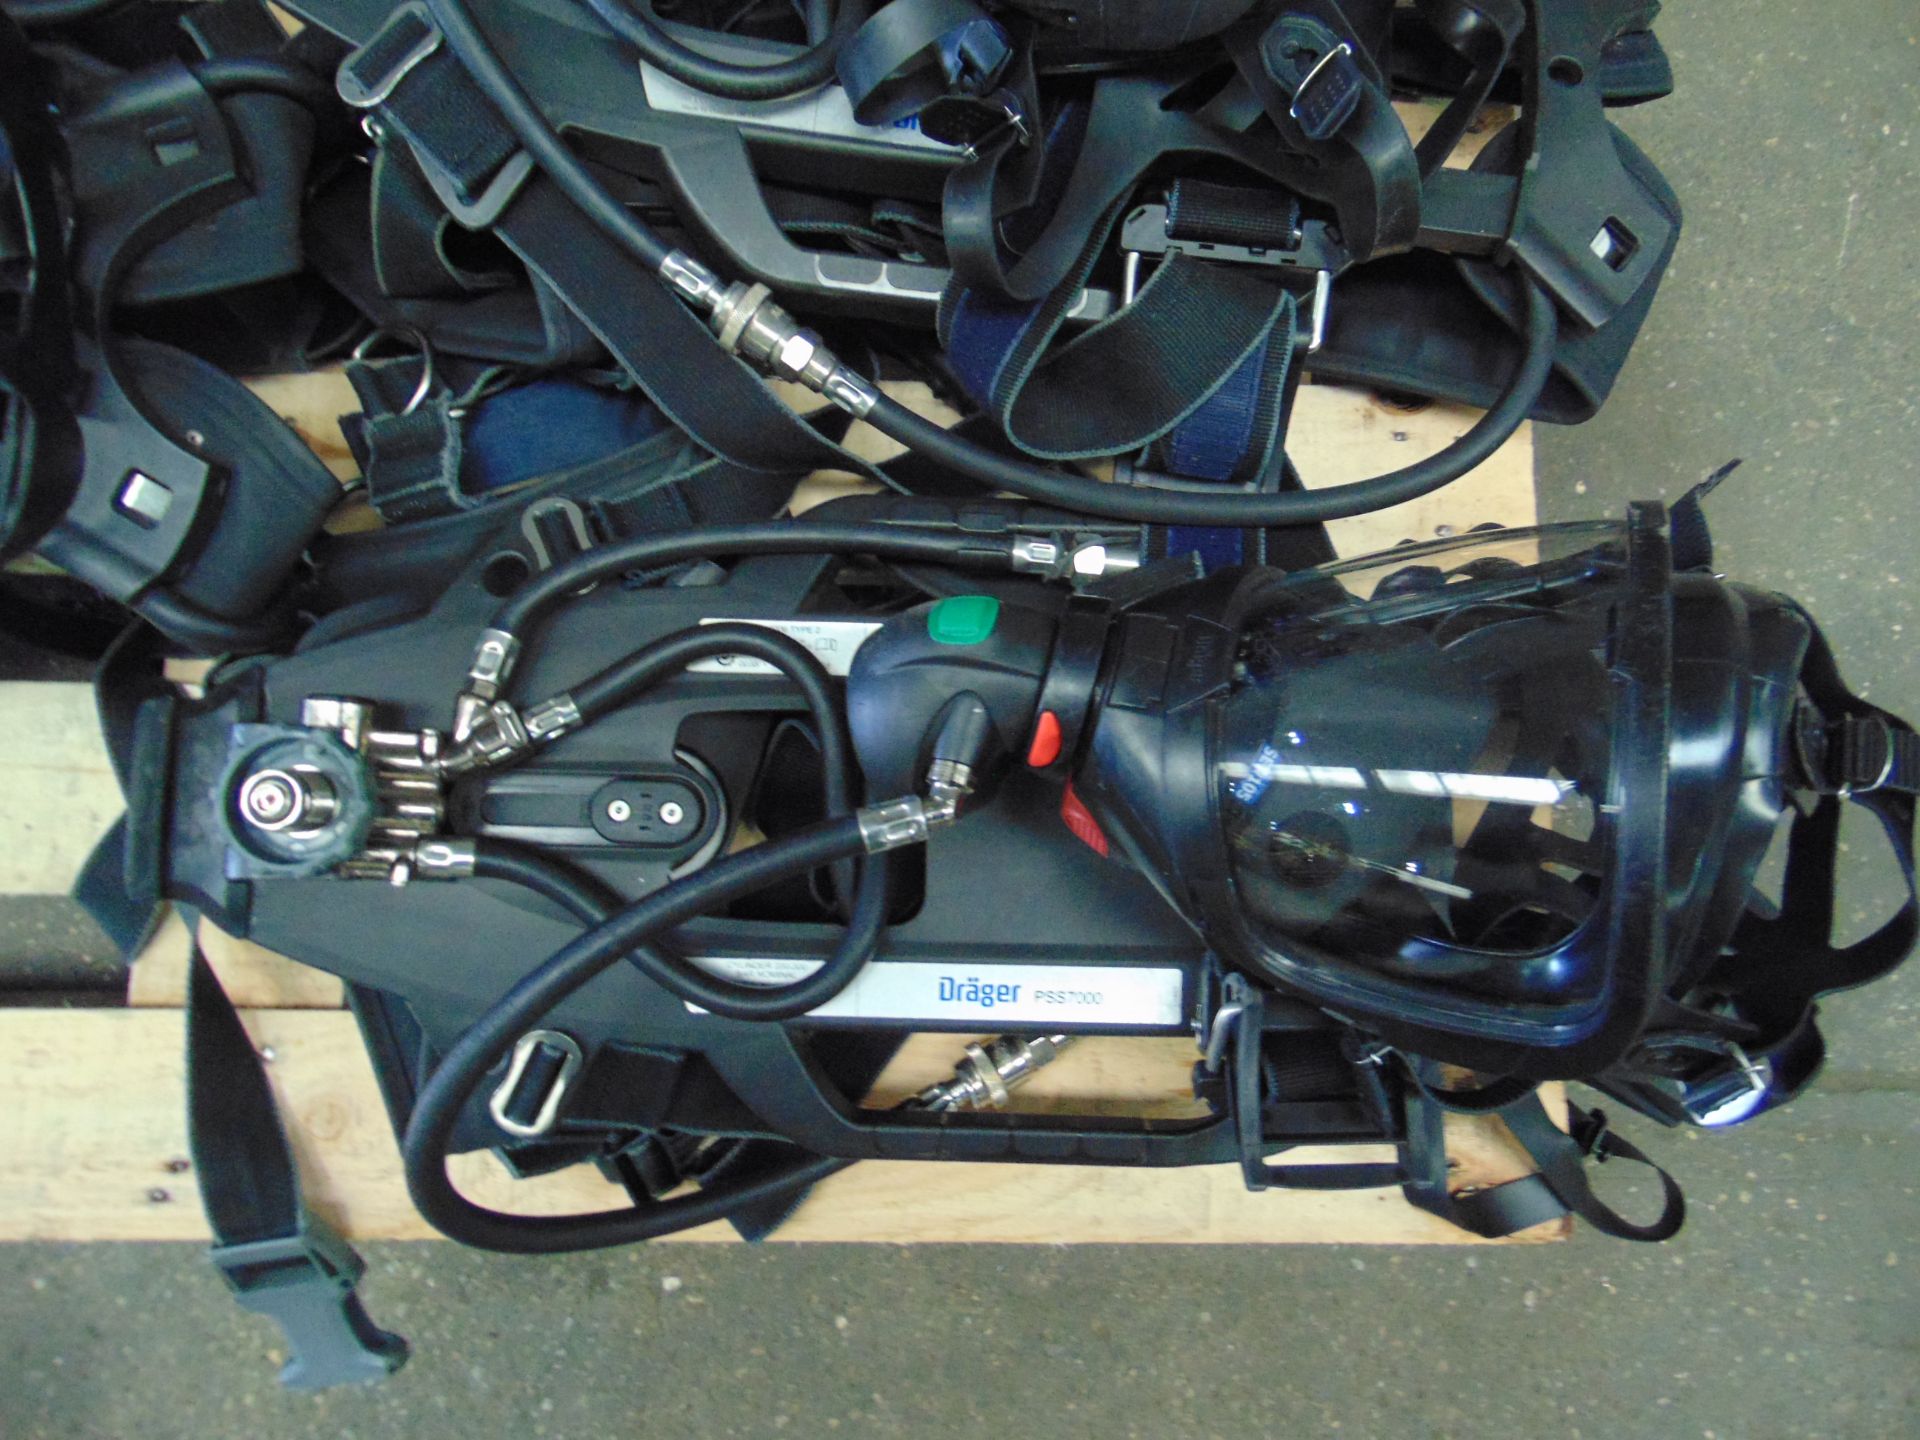 5 x Drager PSS 7000 Self Contained Breathing Apparatus w/ 10 x Drager 300 Bar Air Cylinders - Image 13 of 22